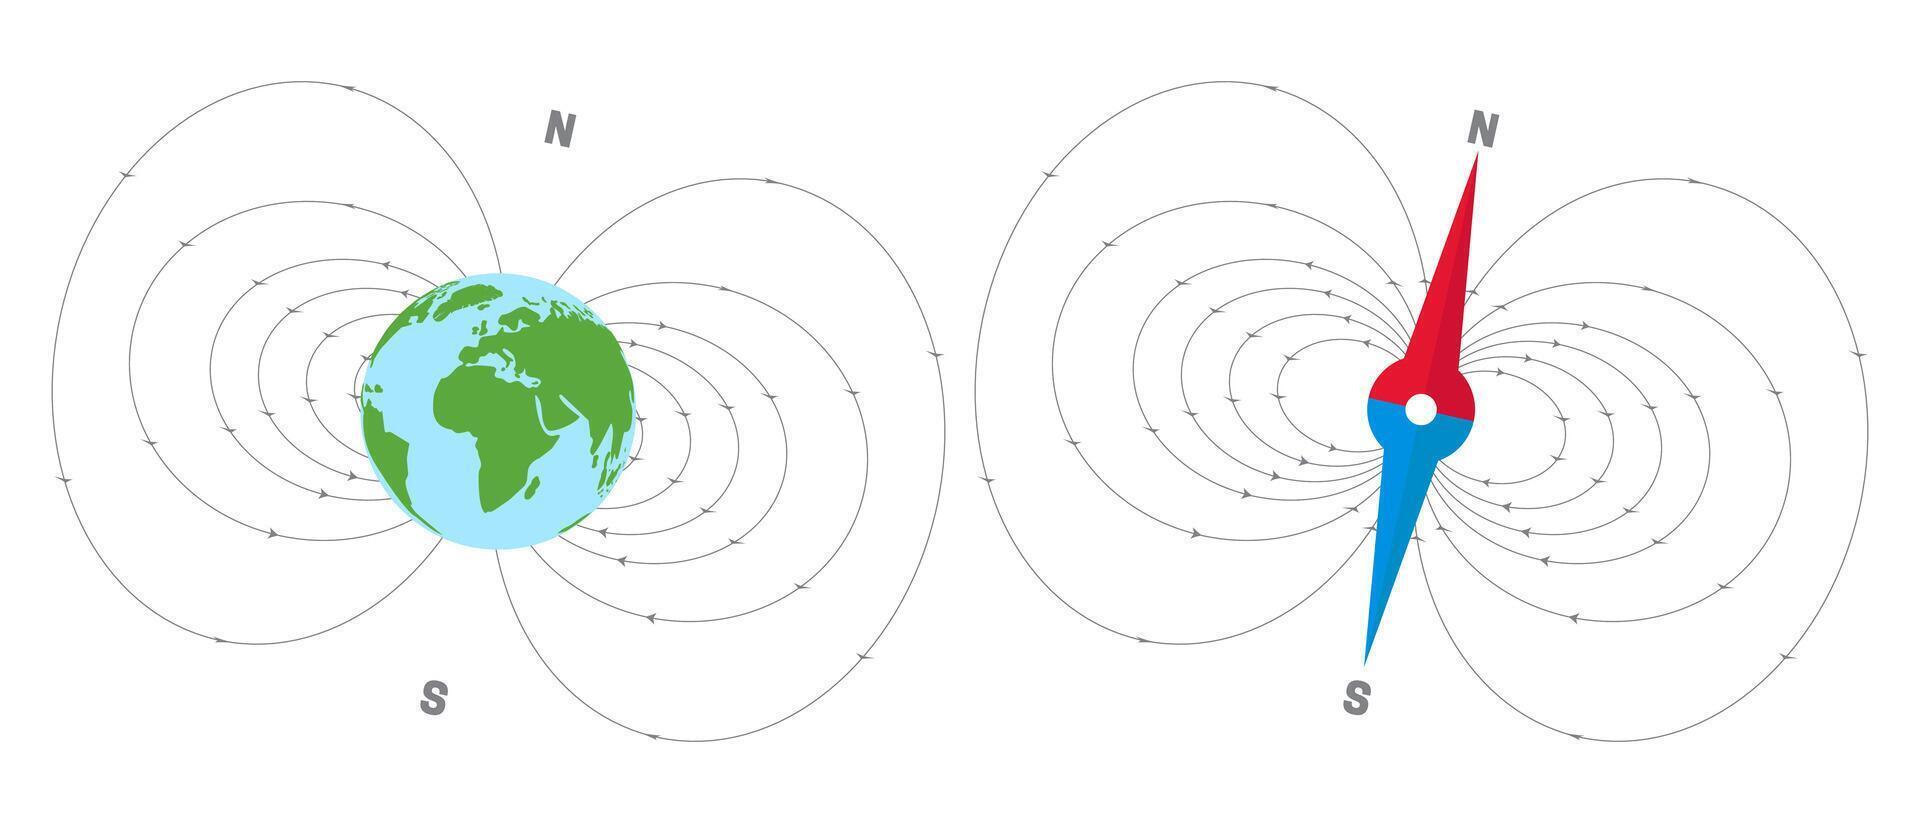 Earth's Magnetic Field or Magnetosphere Illustration and Compass North and South Illustration vector